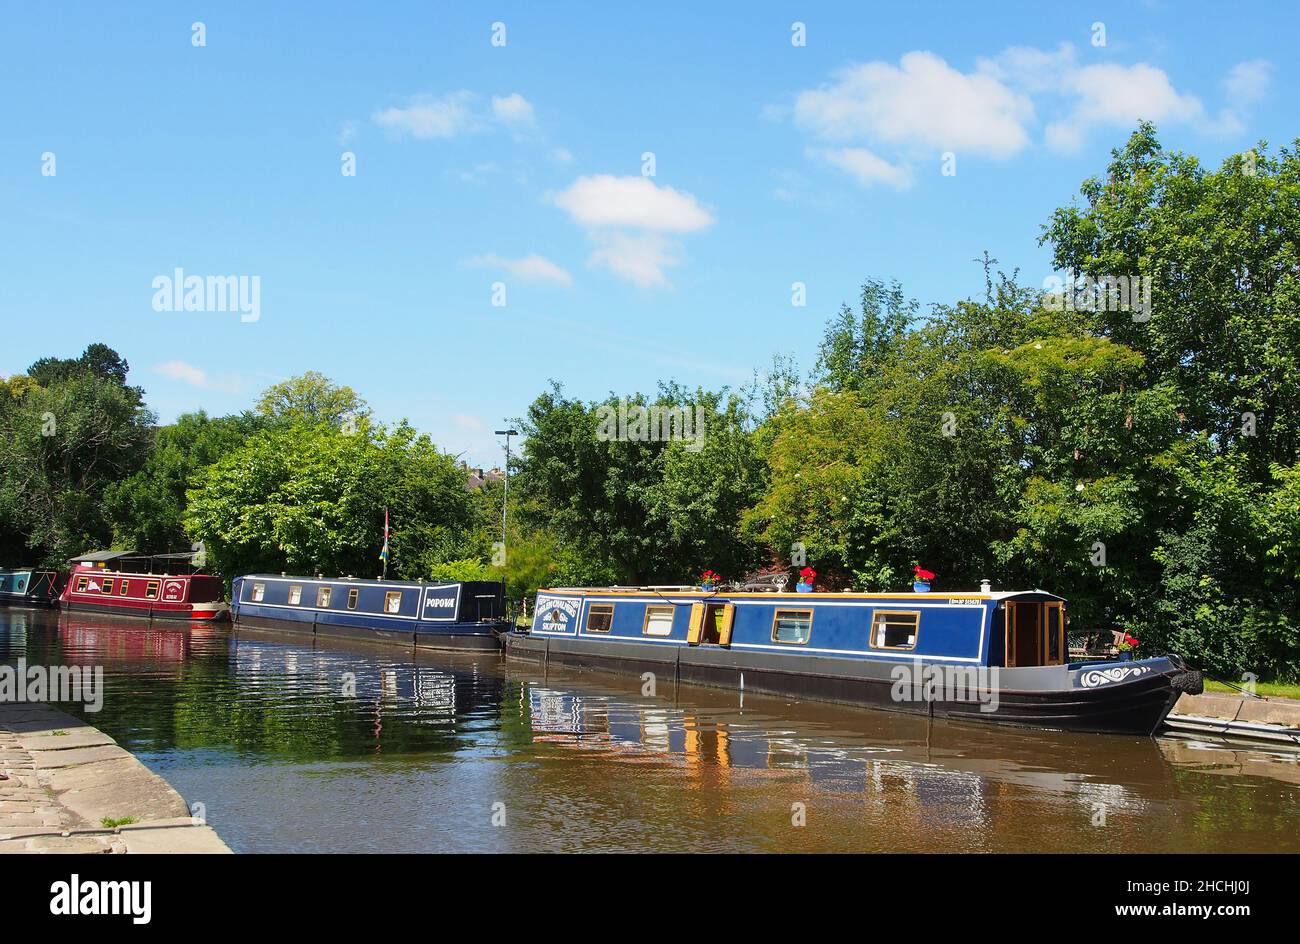 Narrowboats moored on the Thanet Canal or Springs branch of the Leeds and Liverpool canal which runs from Skipton to Skipton Castle. Stock Photo